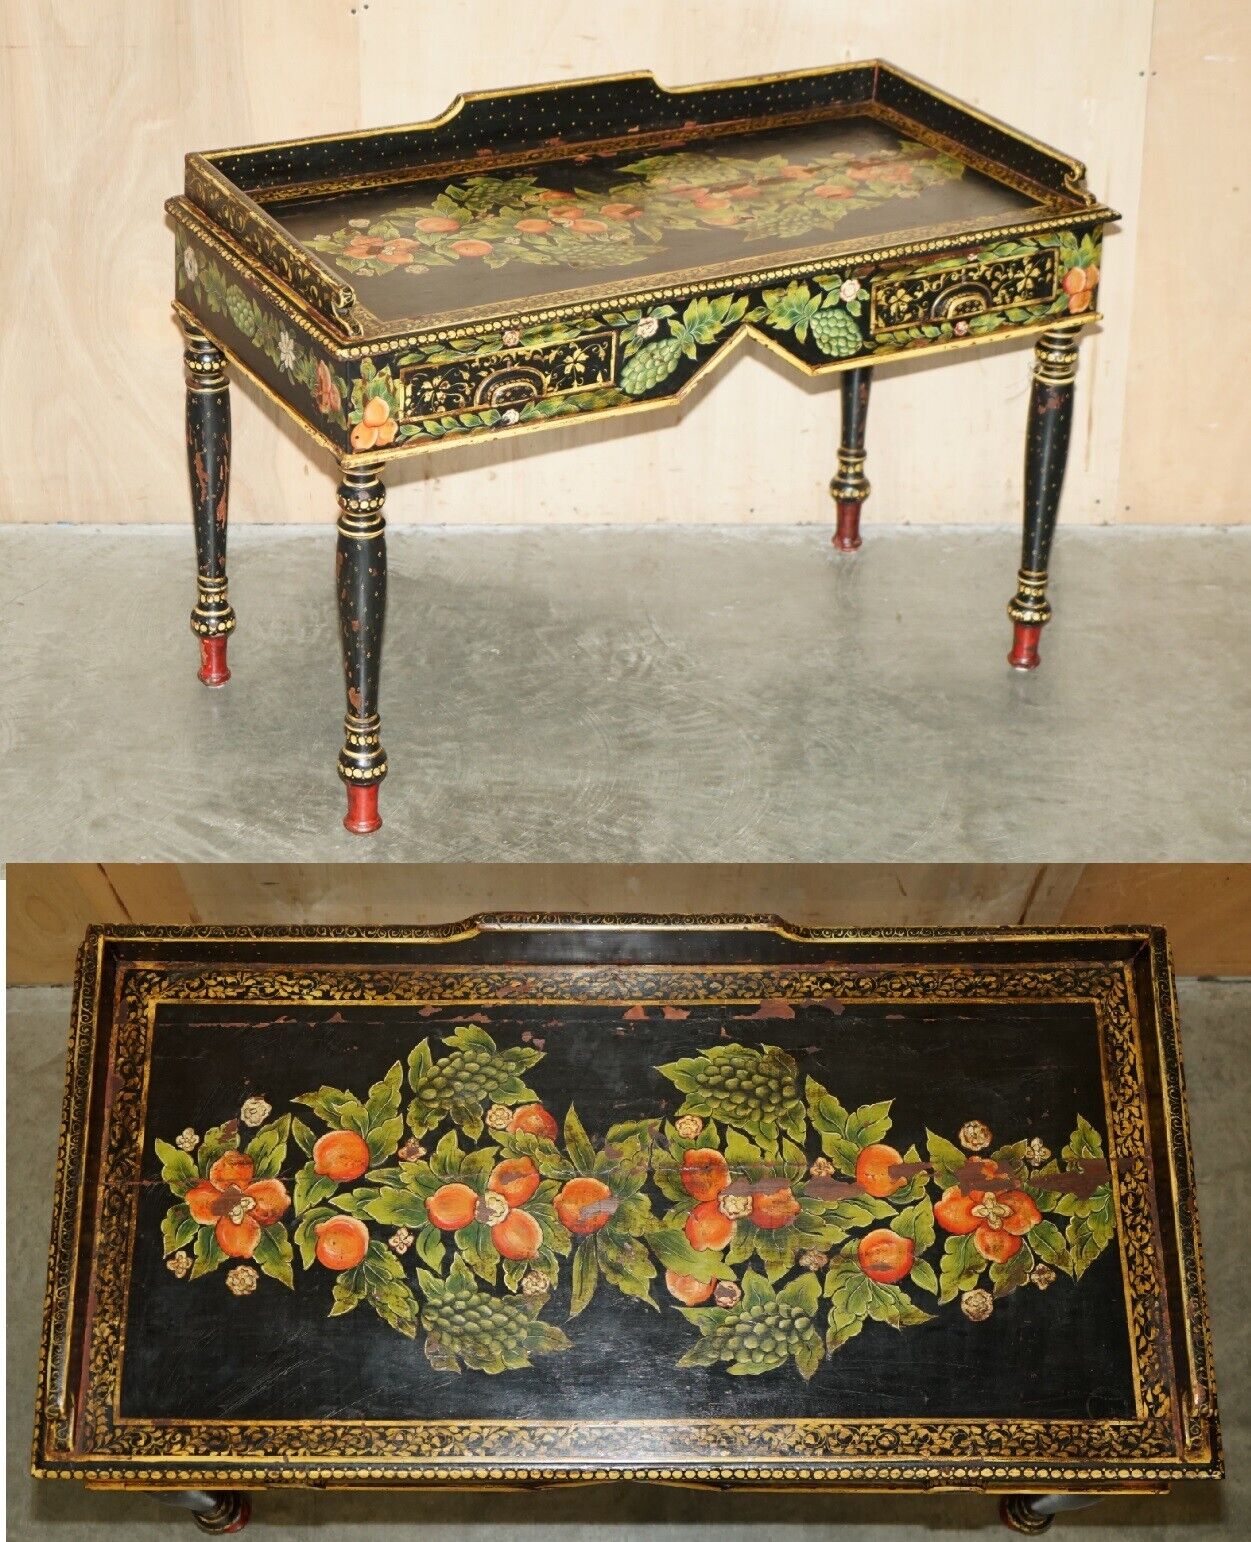 STUNNING ANTIQUE SWEDISH PAINTED WRITING DRESSING TABLE DESK WITH TWIN DRAWERS